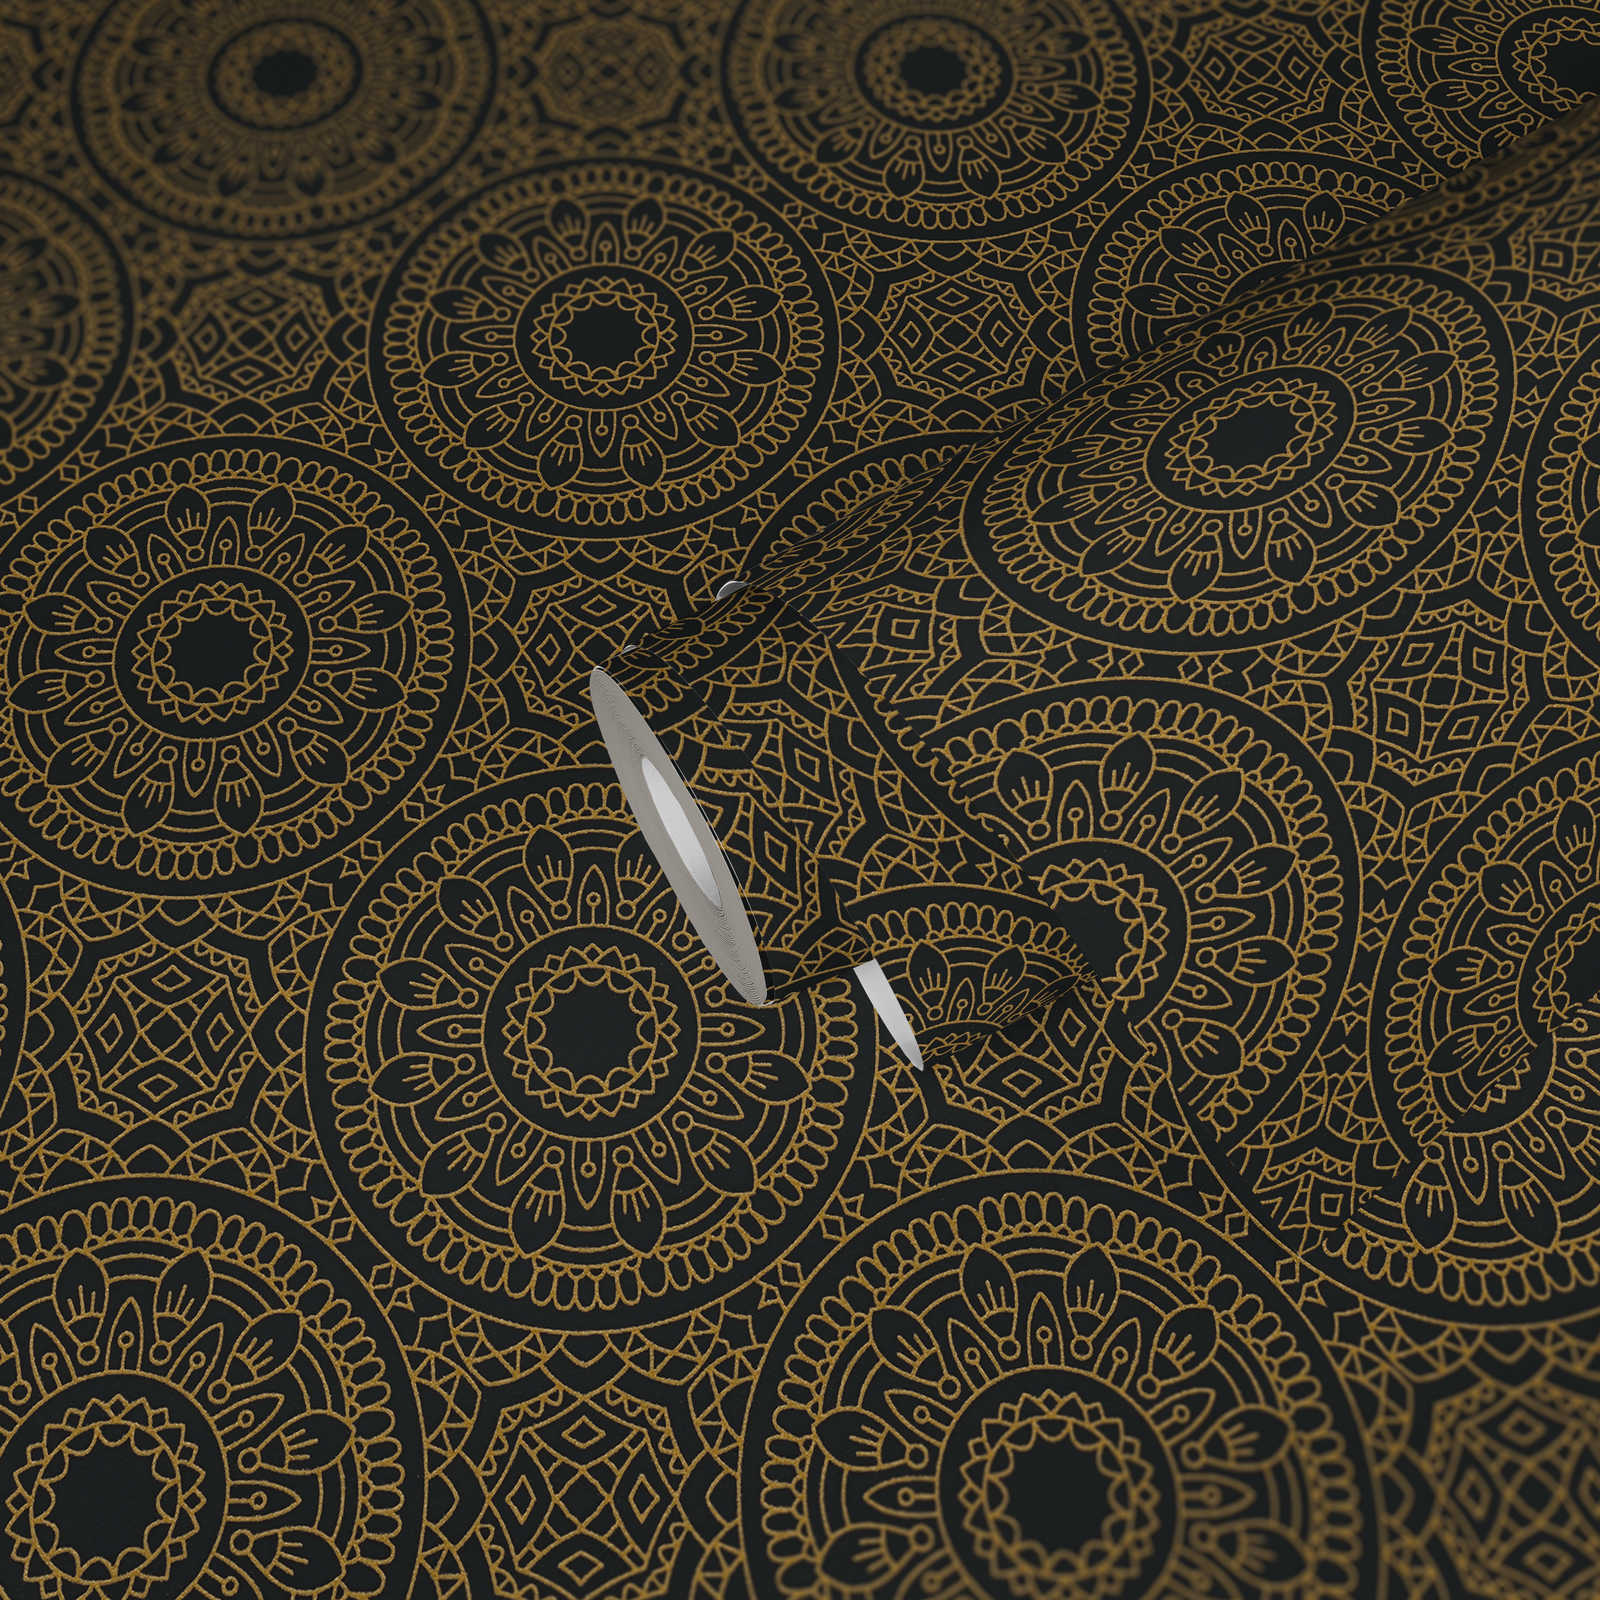             Graphic wallpaper with shiny circle pattern smooth - Black, Gold
        